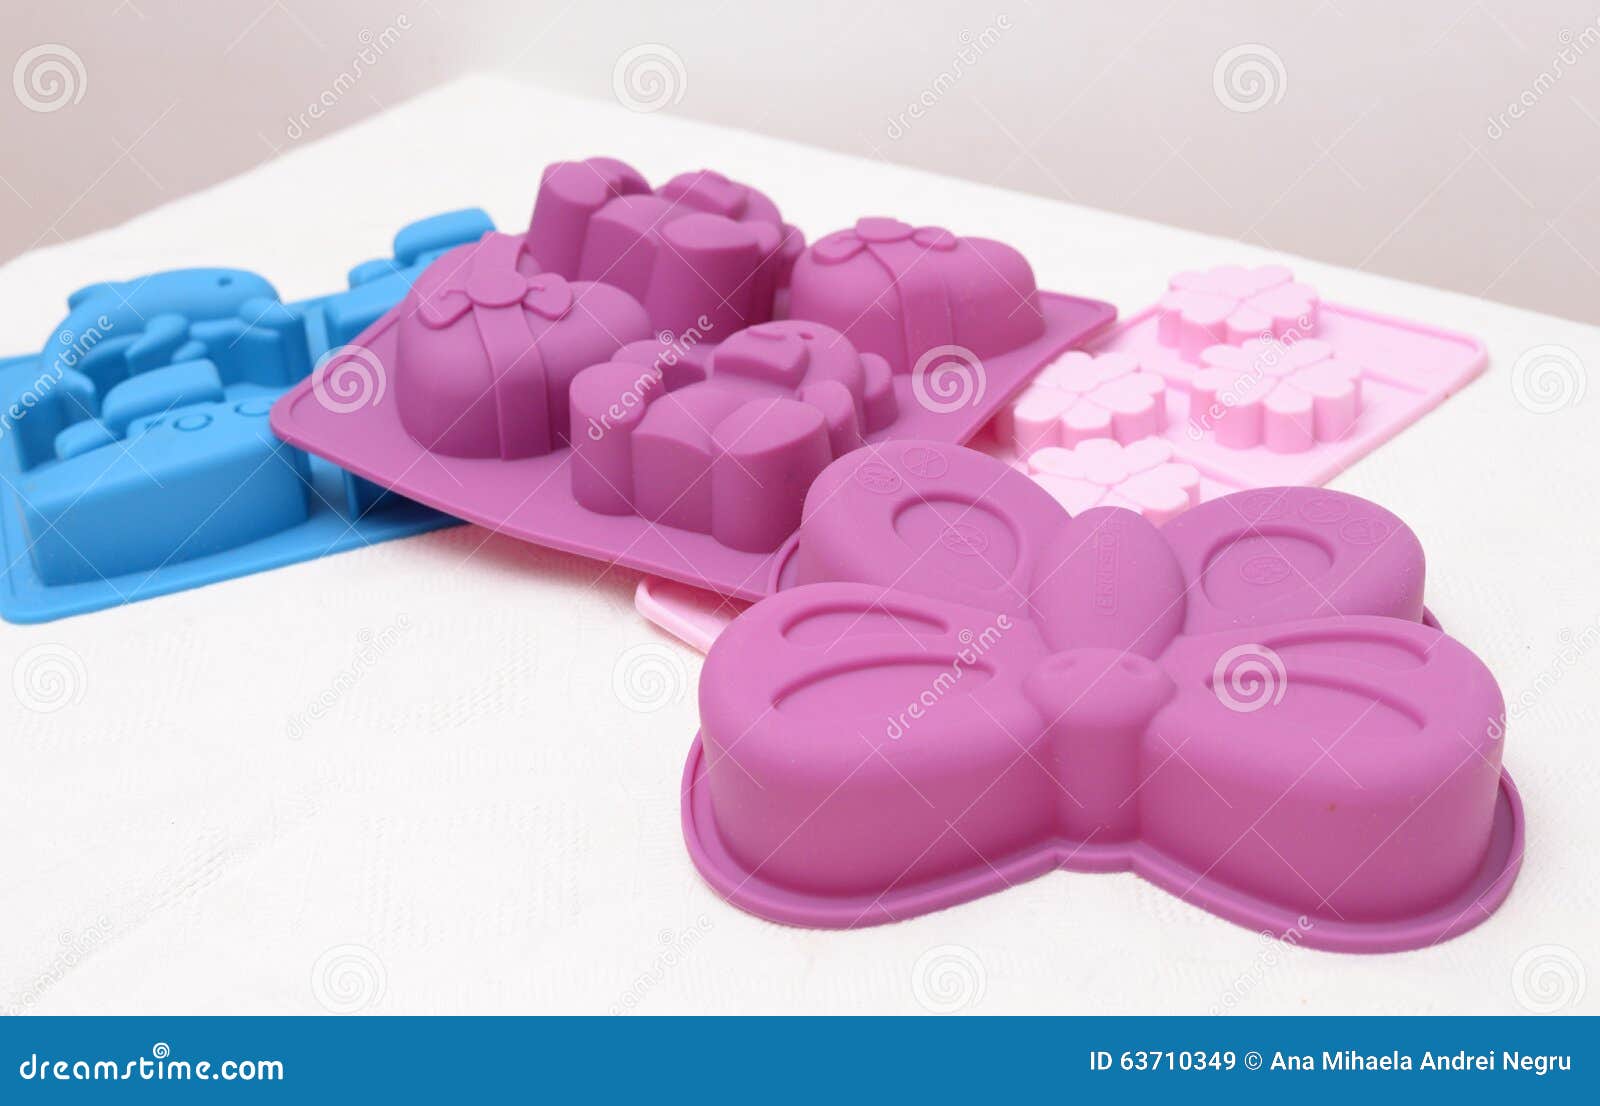 https://thumbs.dreamstime.com/z/baking-silicone-moulds-shape-butterfly-hearts-dolphin-car-flowers-white-background-63710349.jpg